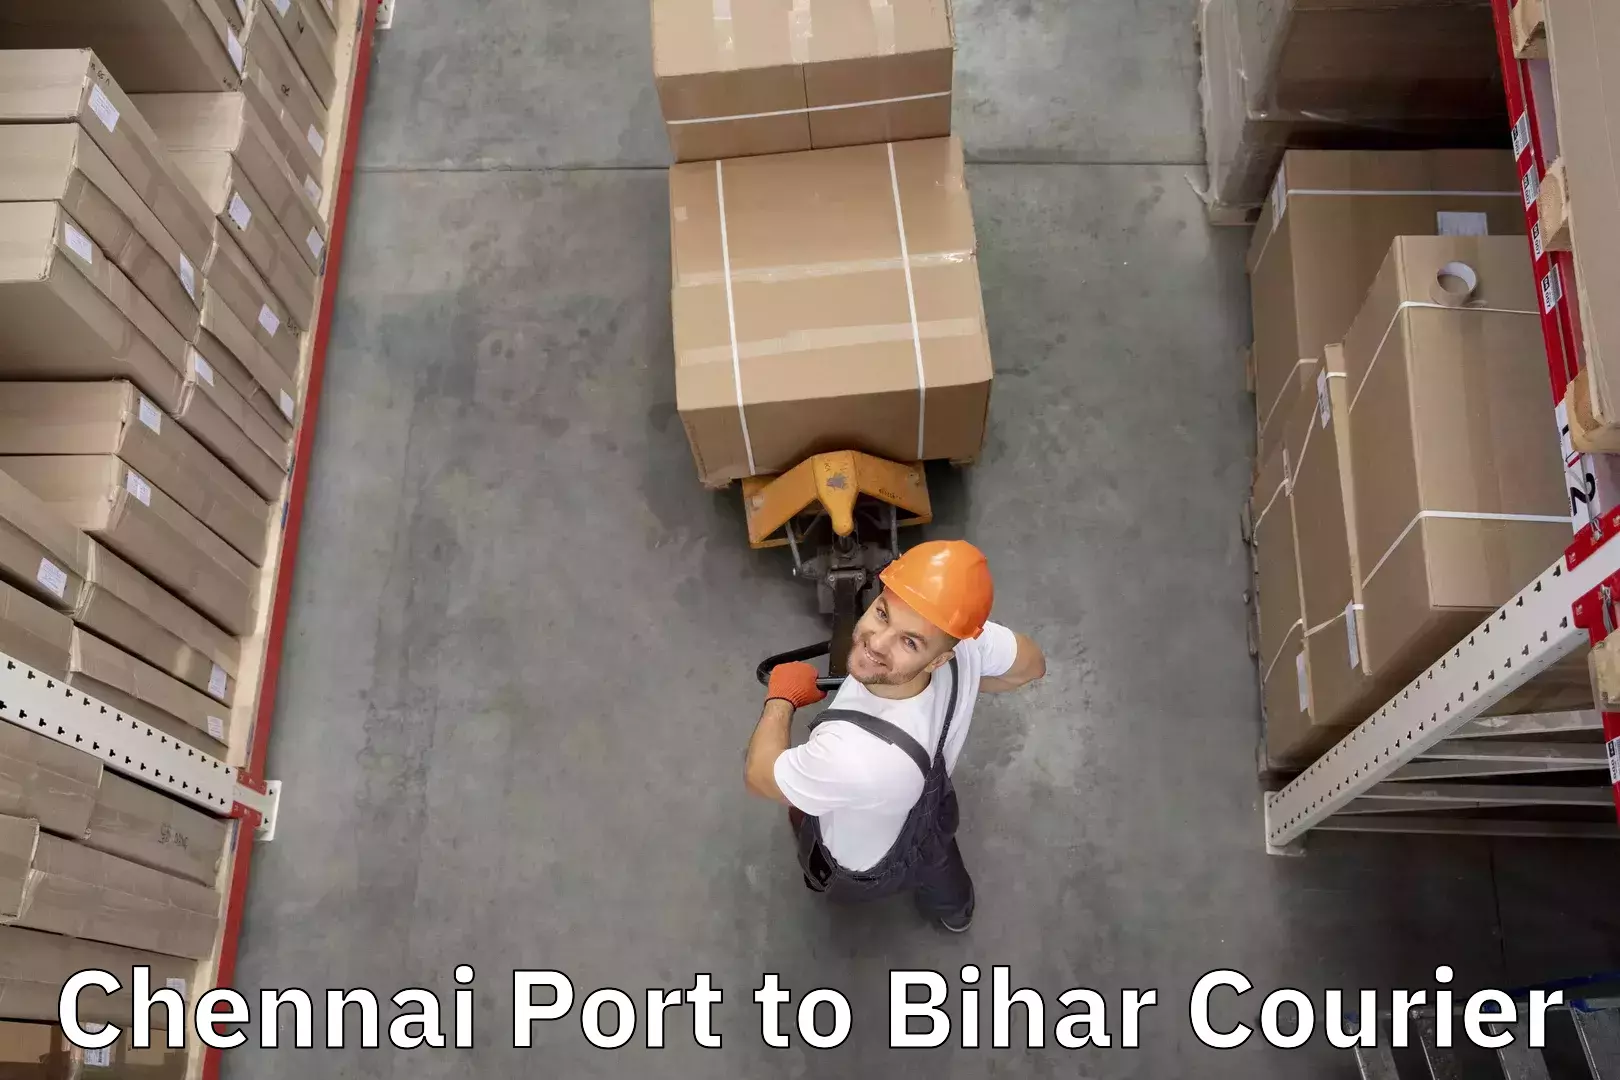 Baggage relocation service Chennai Port to Arwal